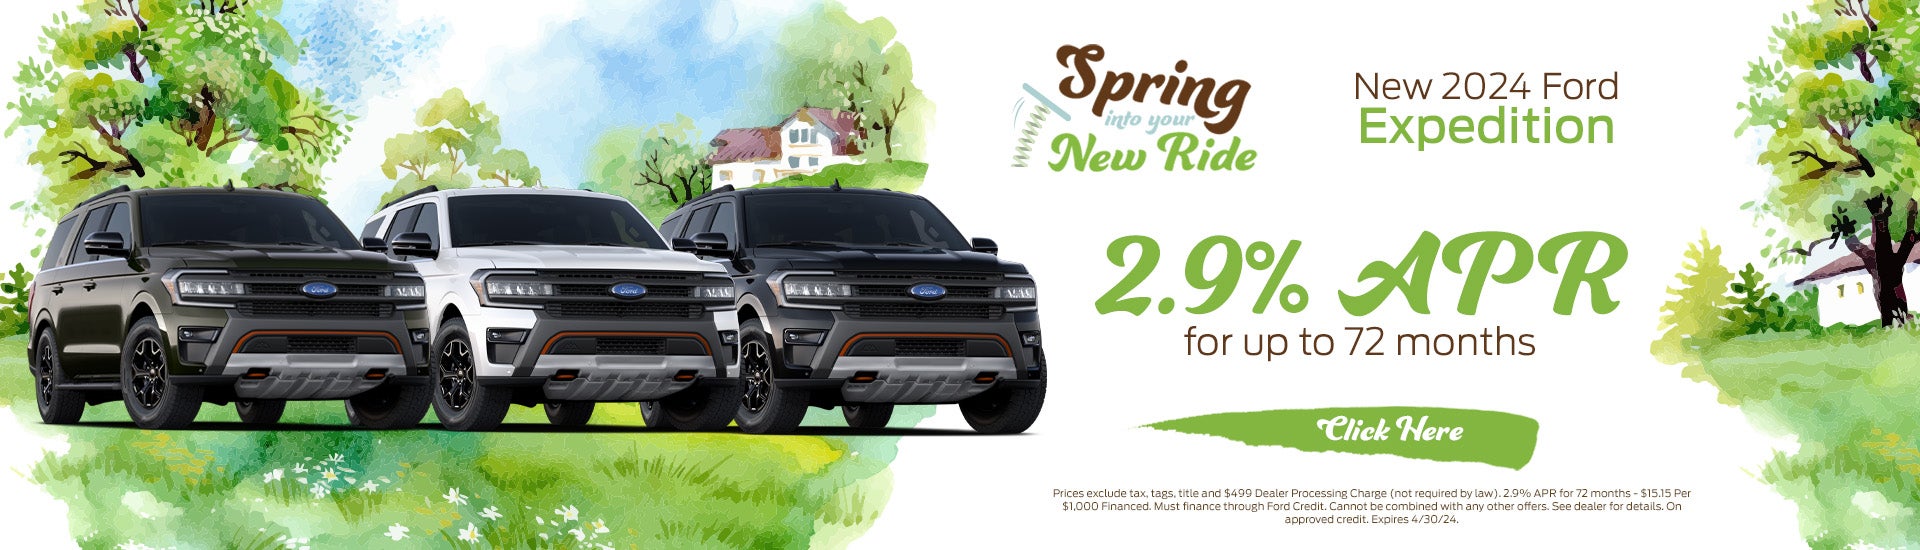 Expedition 2.9% APR